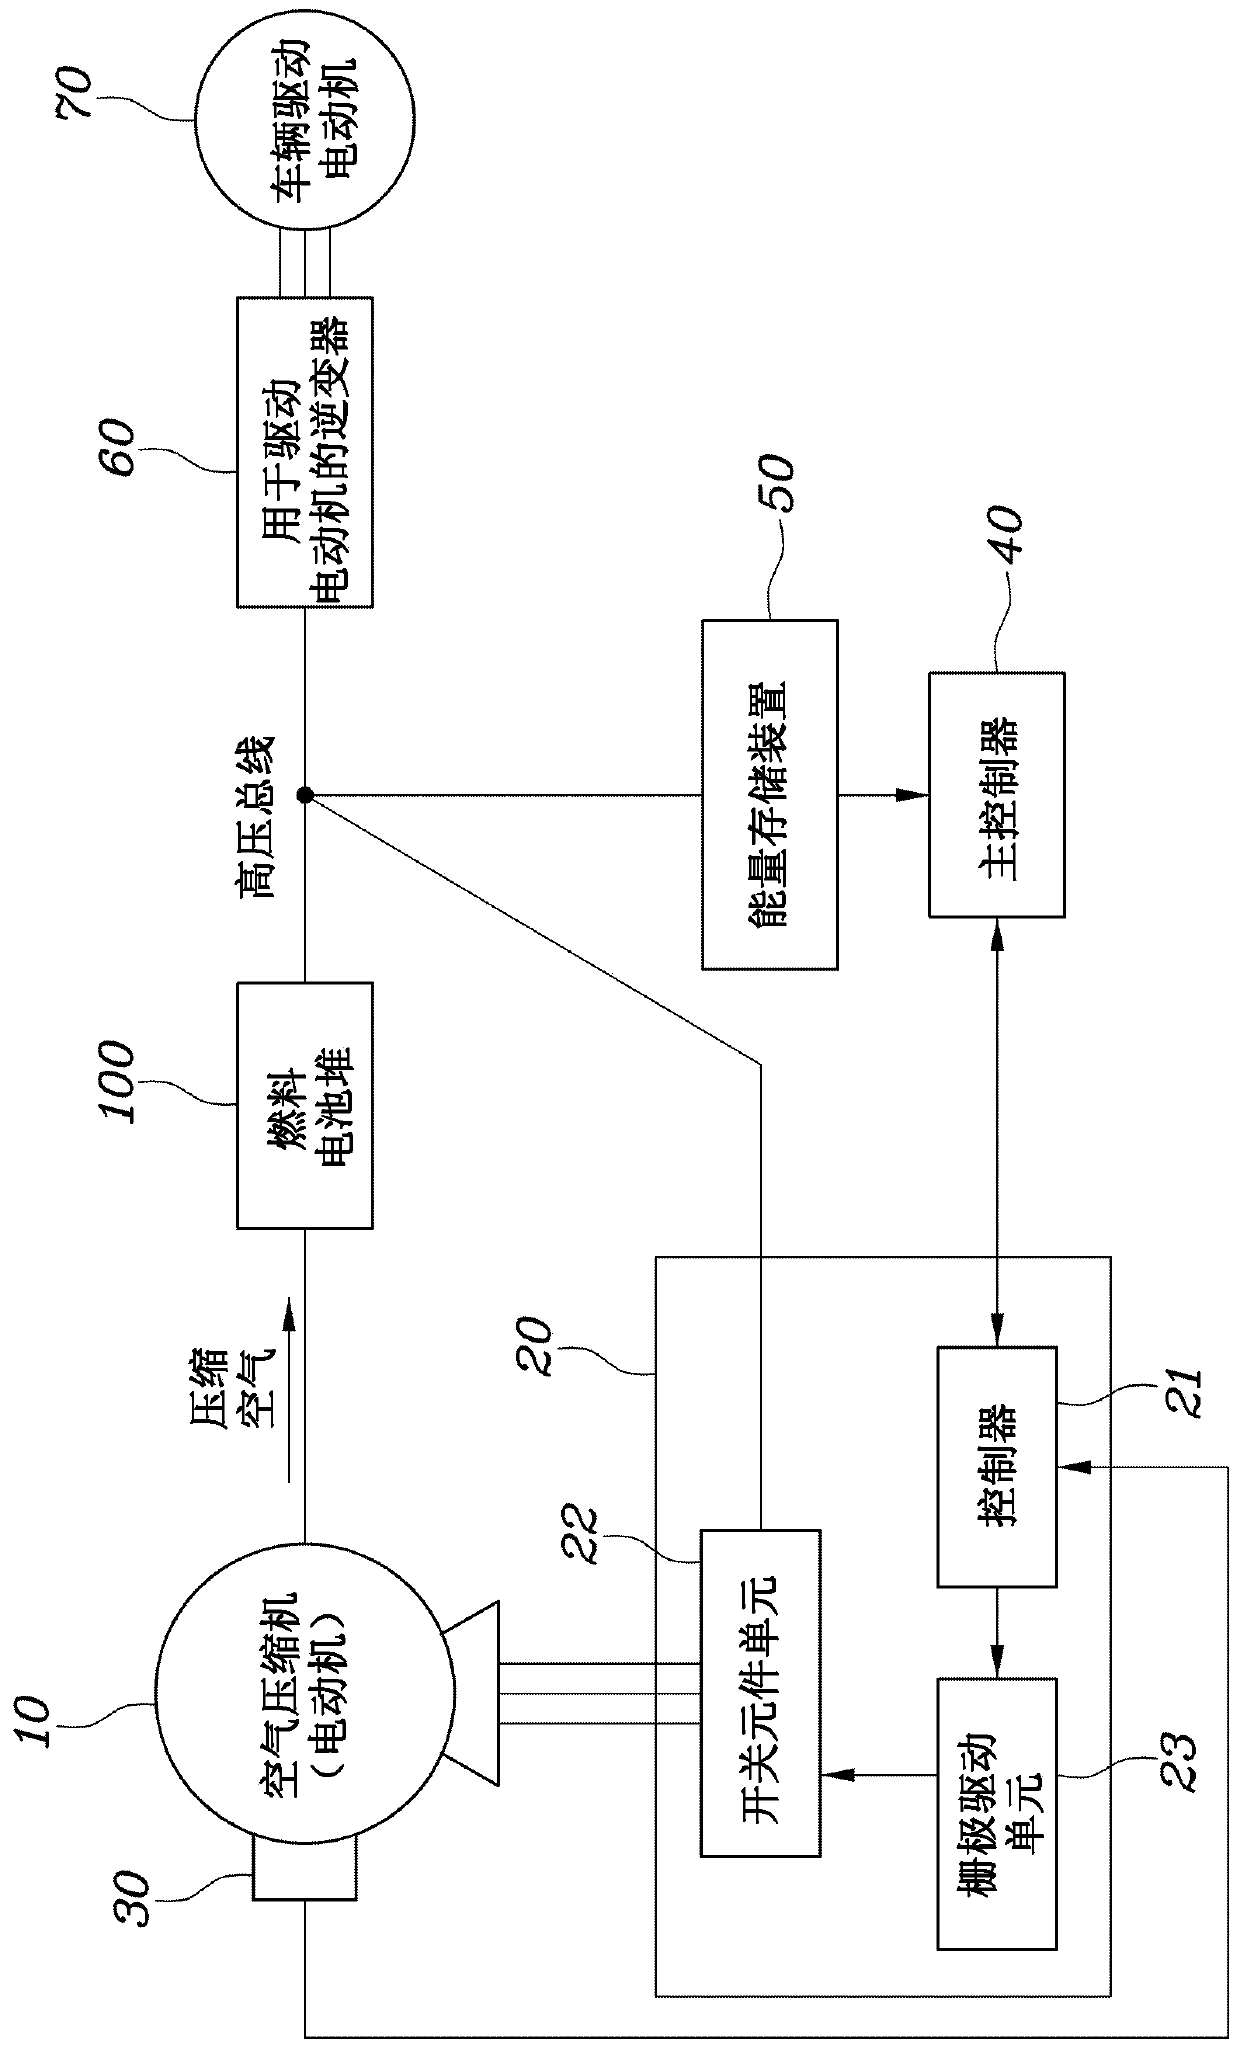 System and method of controlling air compressor motor for fuel cell vehicle